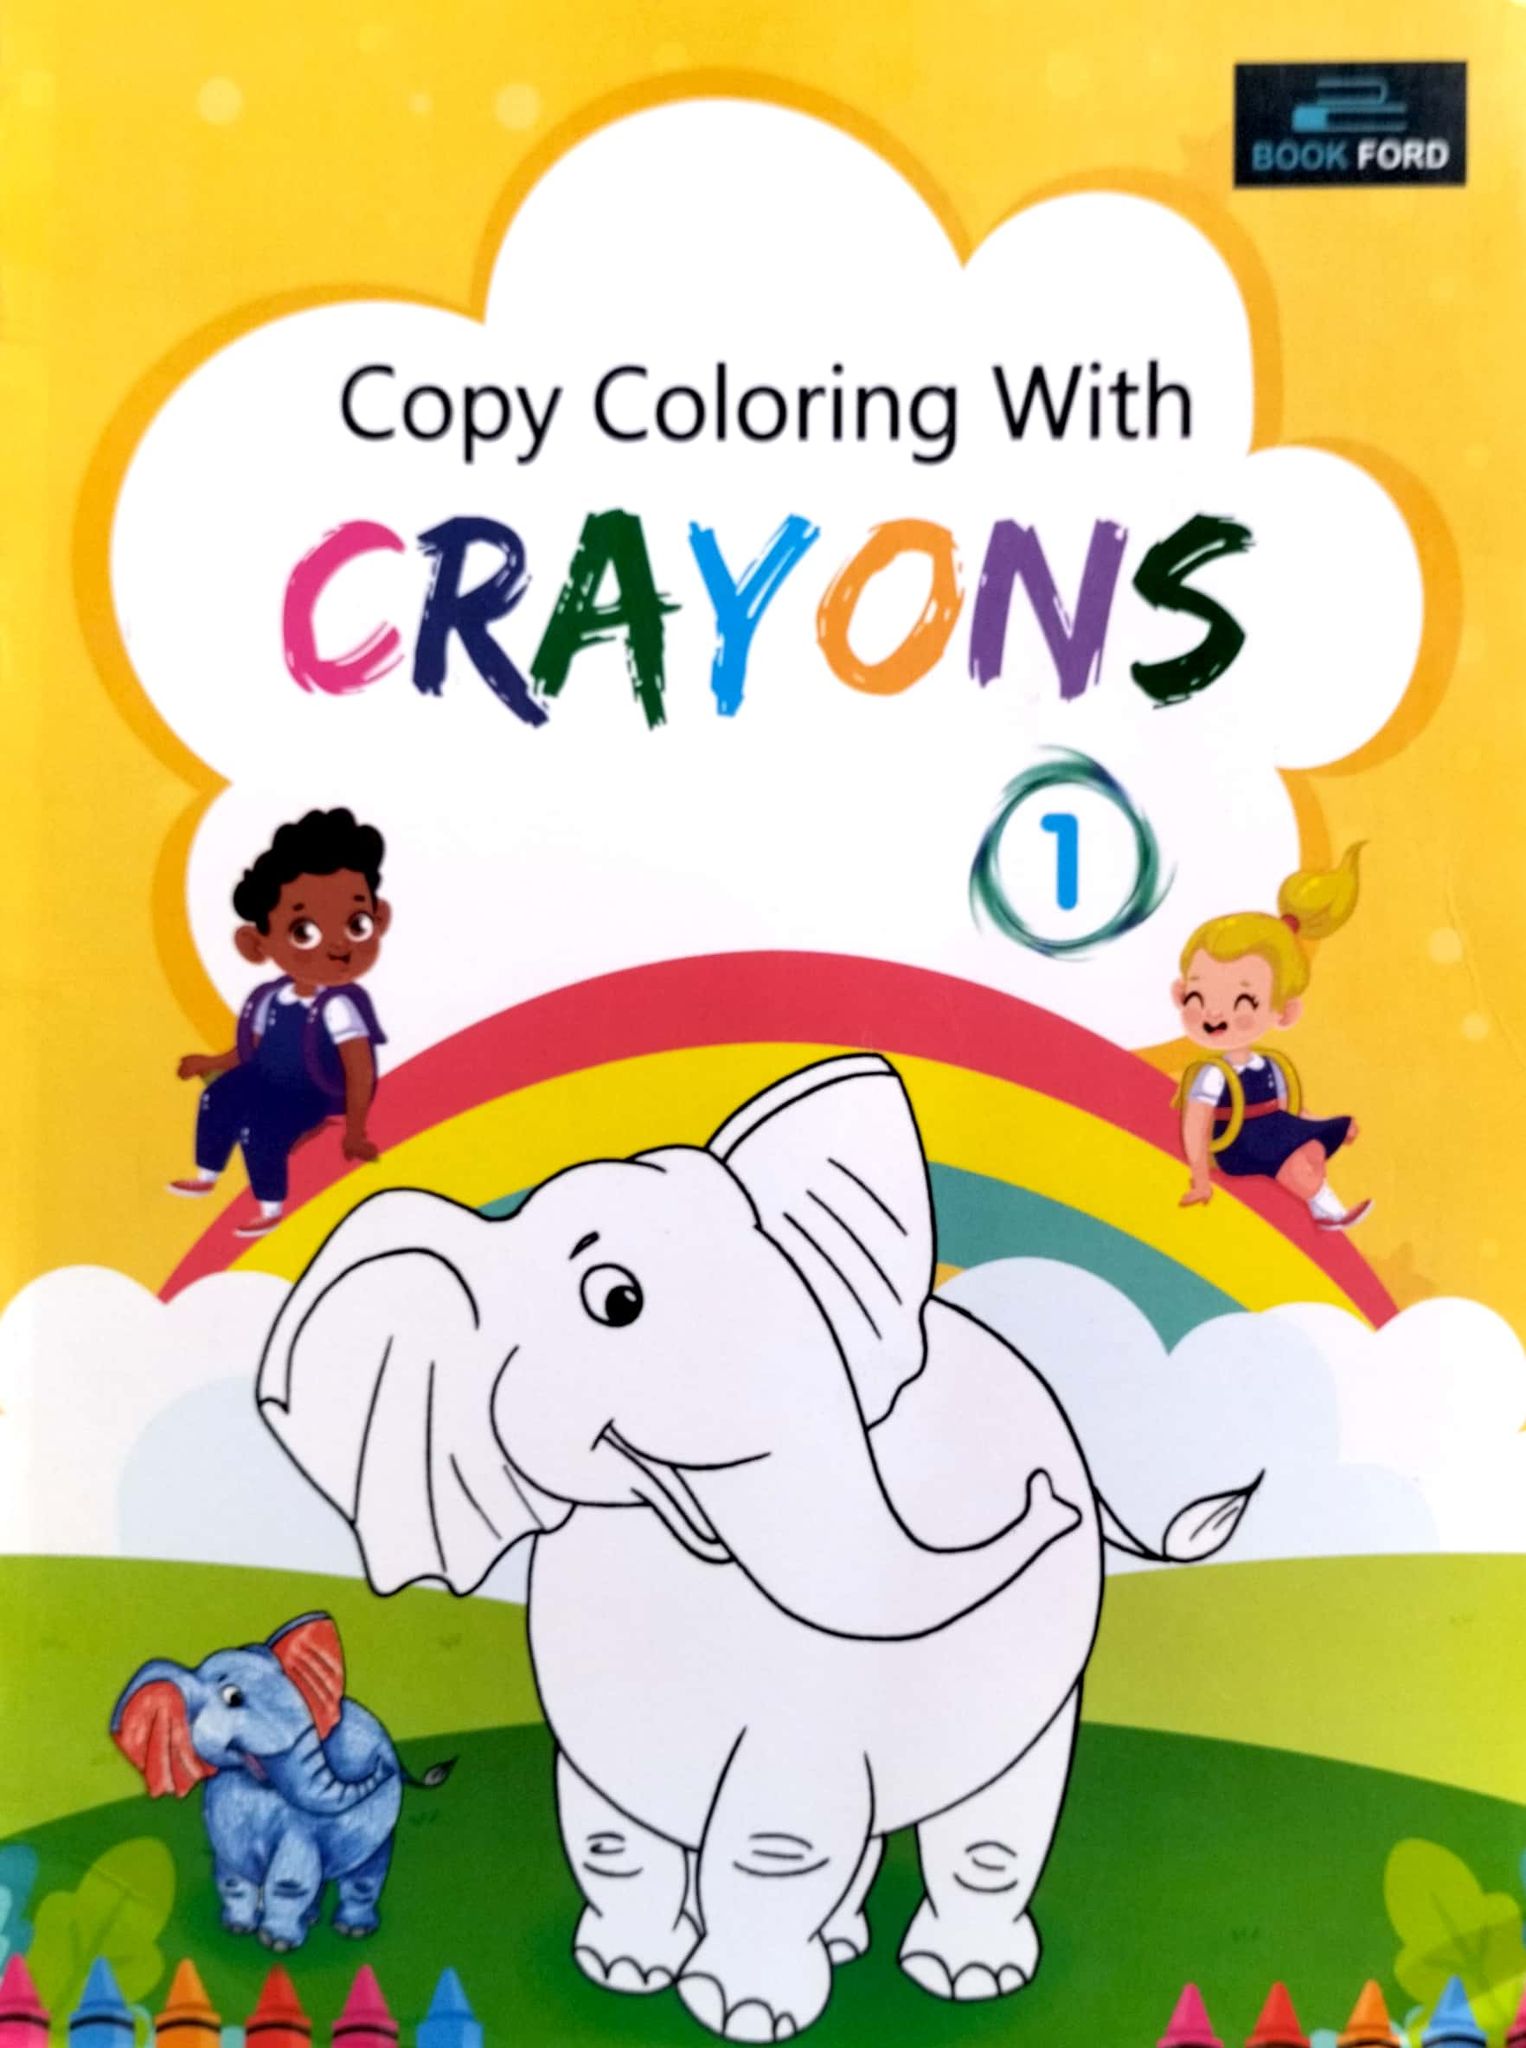 Copy Coloring With Crayons 1 (পেপারব্যাক)